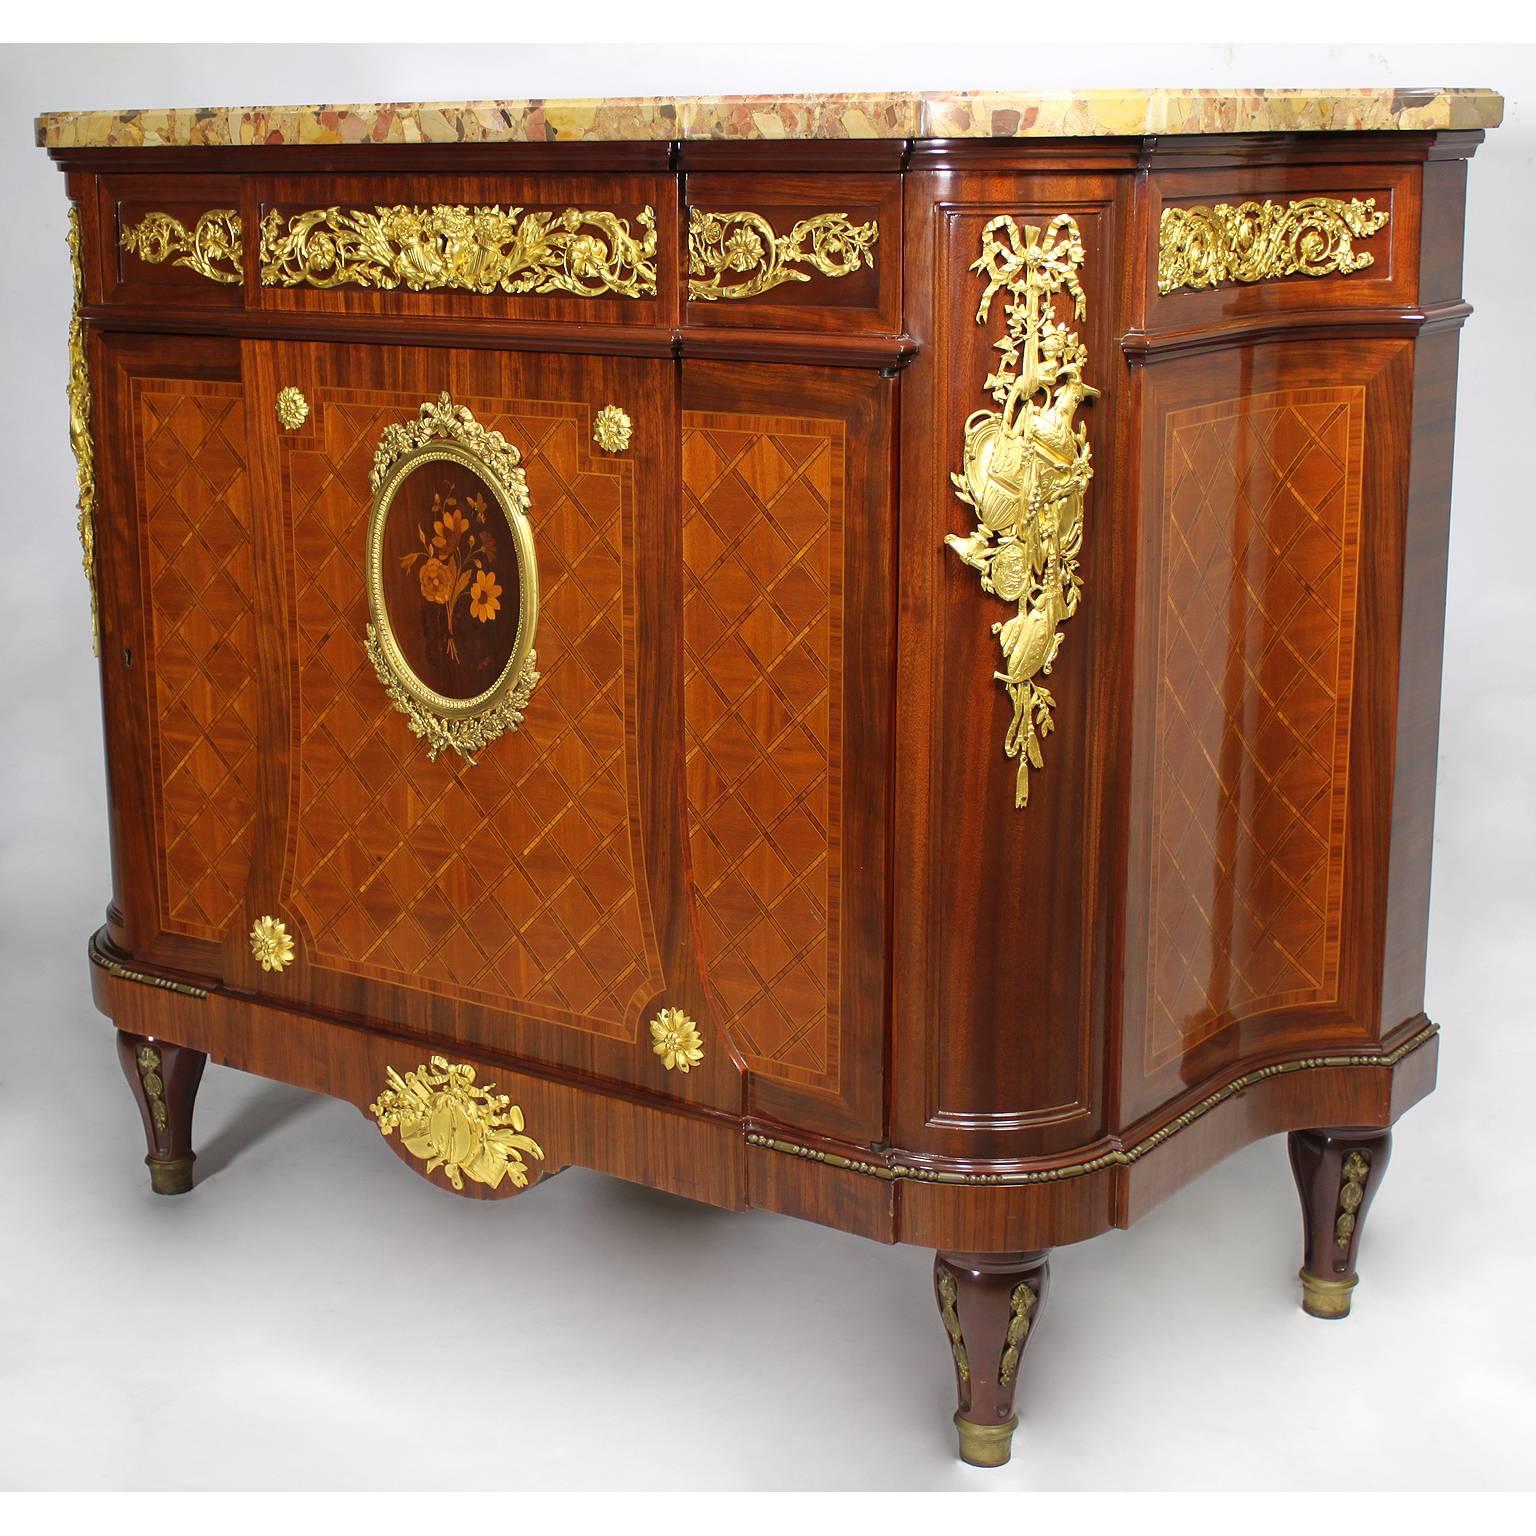 A very fine French 19th century Louis XVI style belle époque ormolu-mounted kingwood, satinwood and mahogany parquetry and marquetry demilune commode with a brèche d'alep marble top, attributed to François Linke (1855-1946). The single front